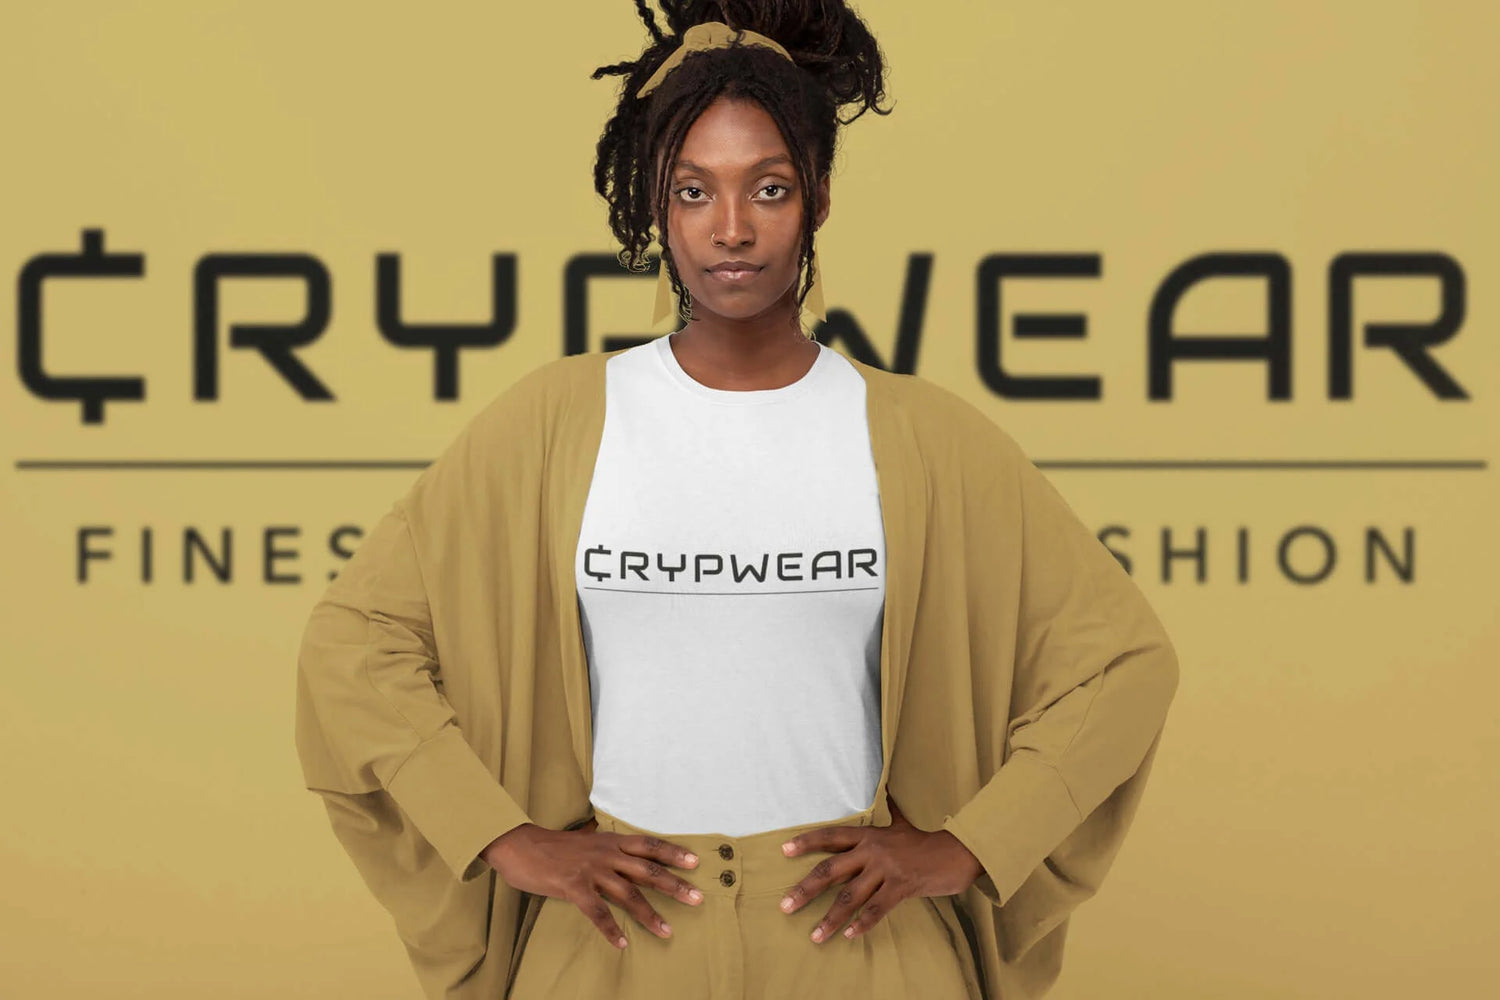 CrypWear Collection - Black woman with dark skin in CrypWear Collection shirt against golden background